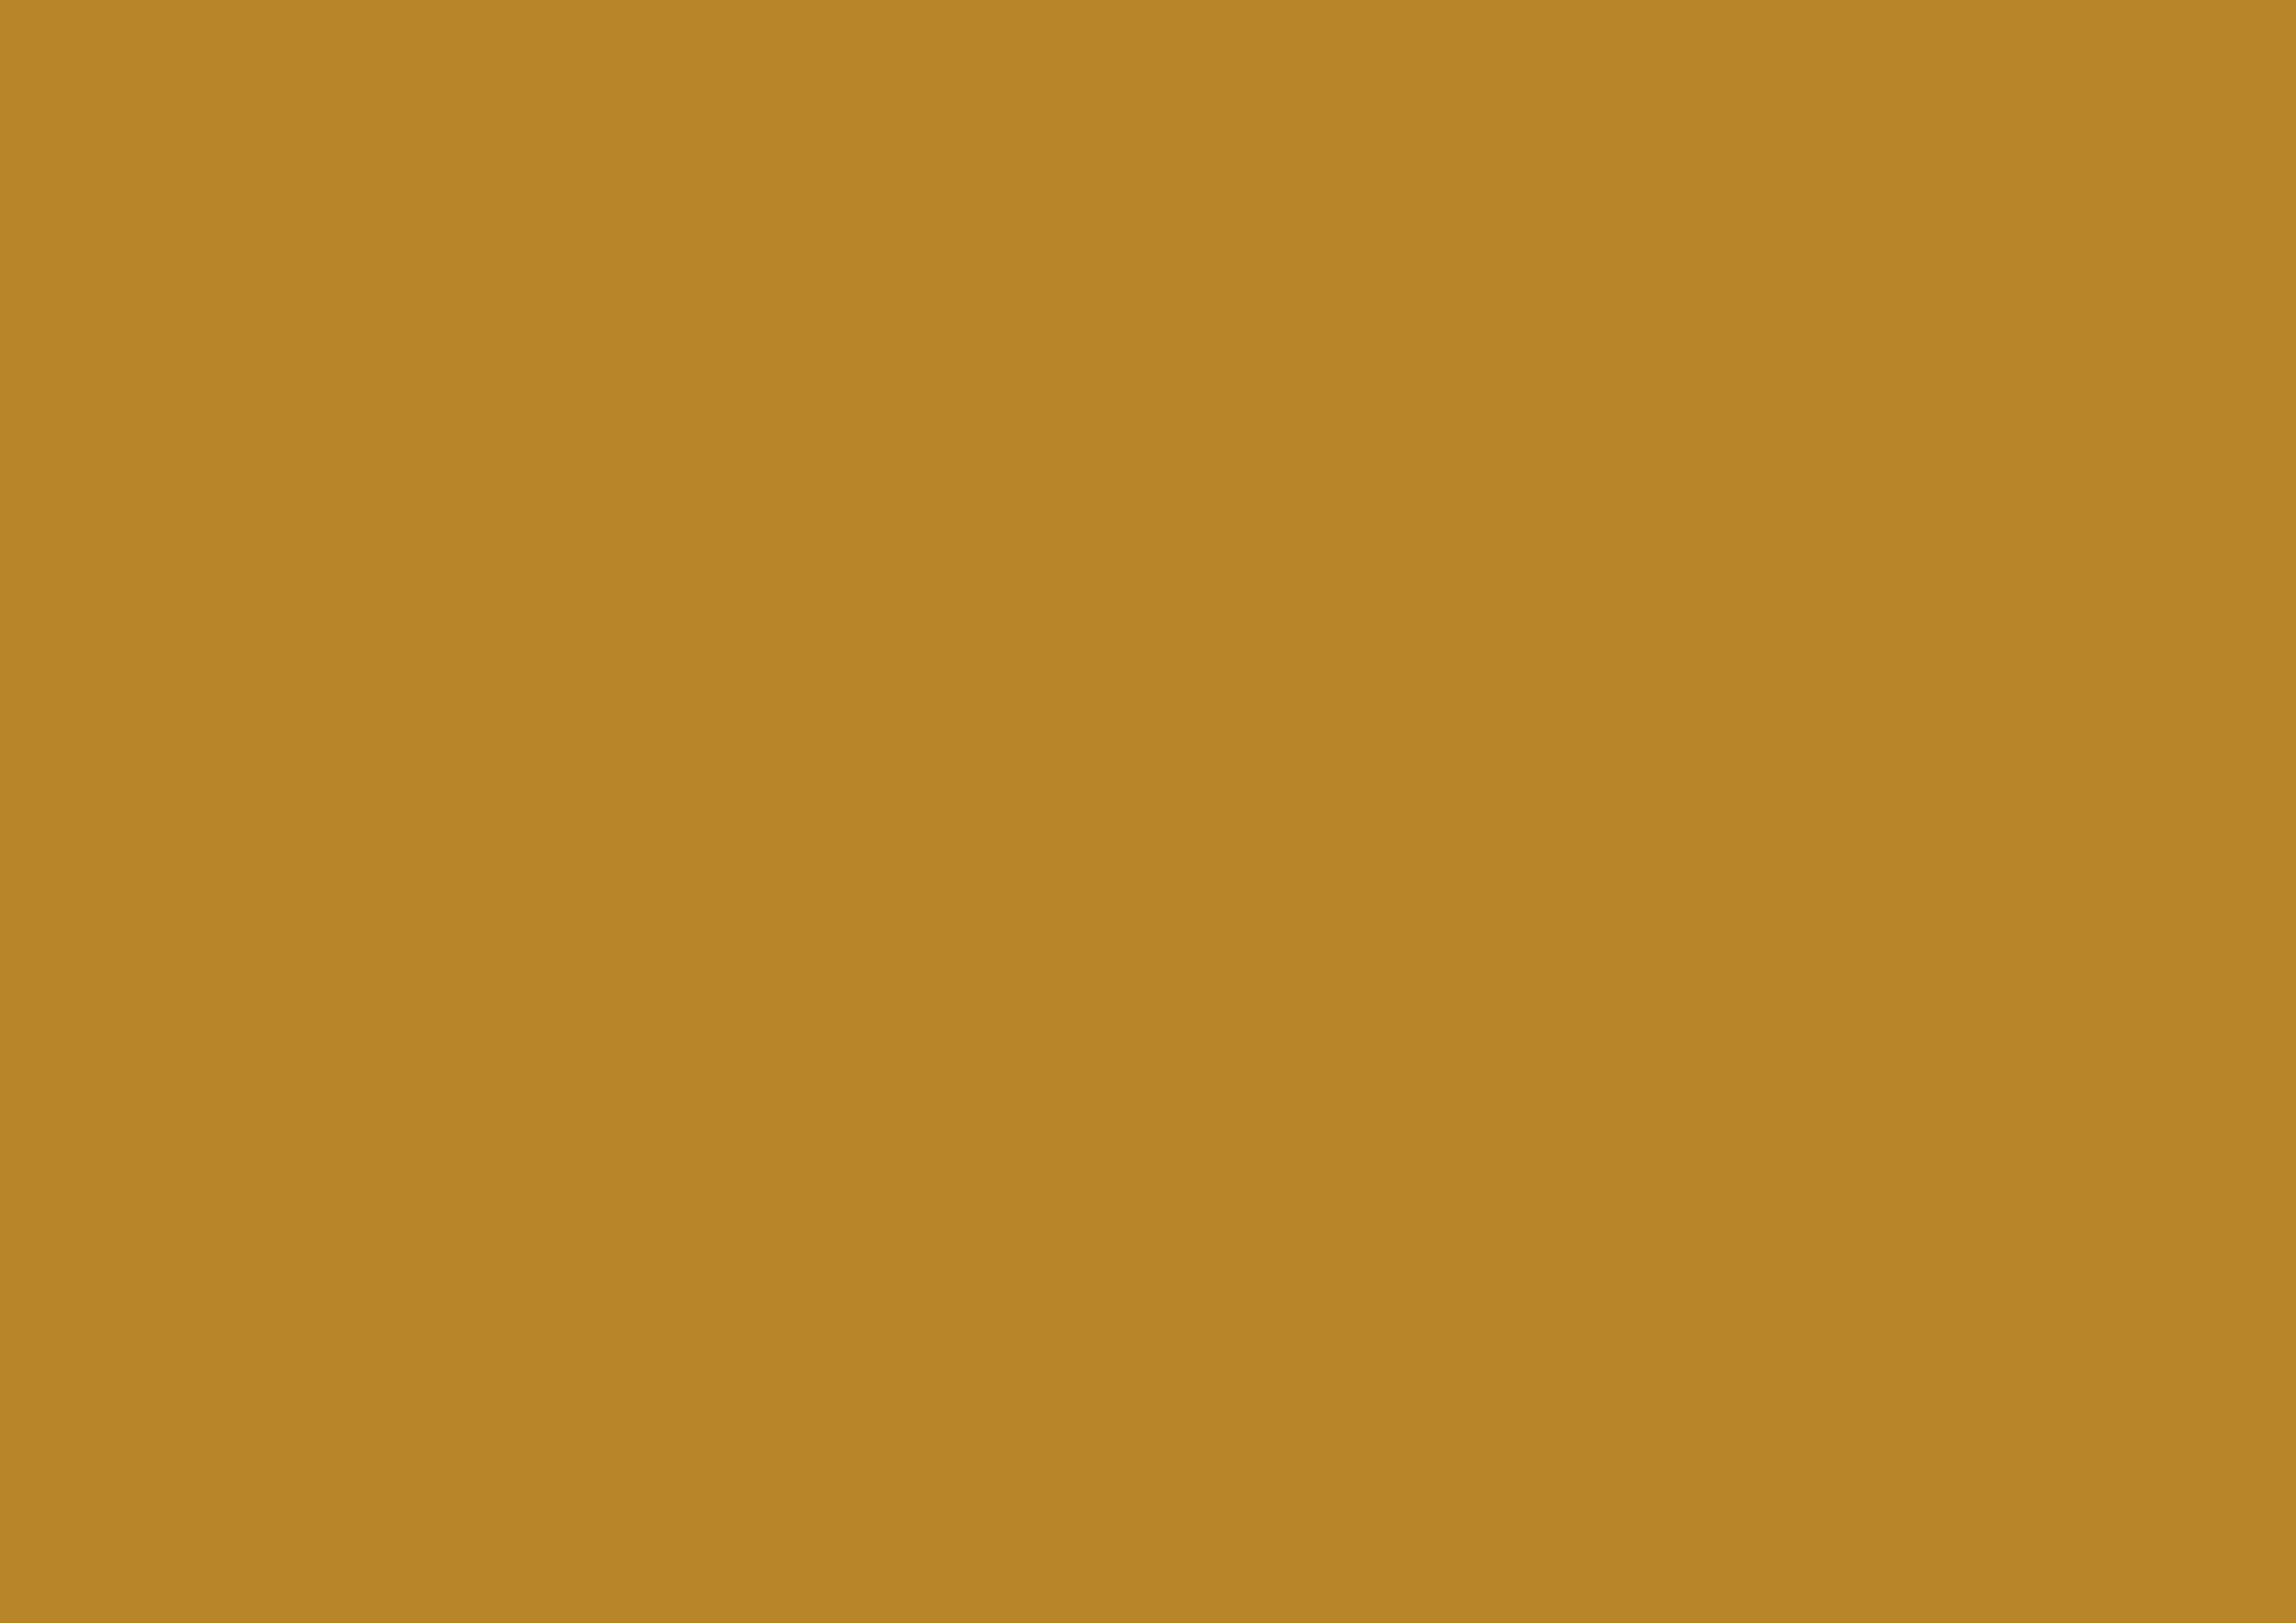 3508x2480 University Of California Gold Solid Color Background